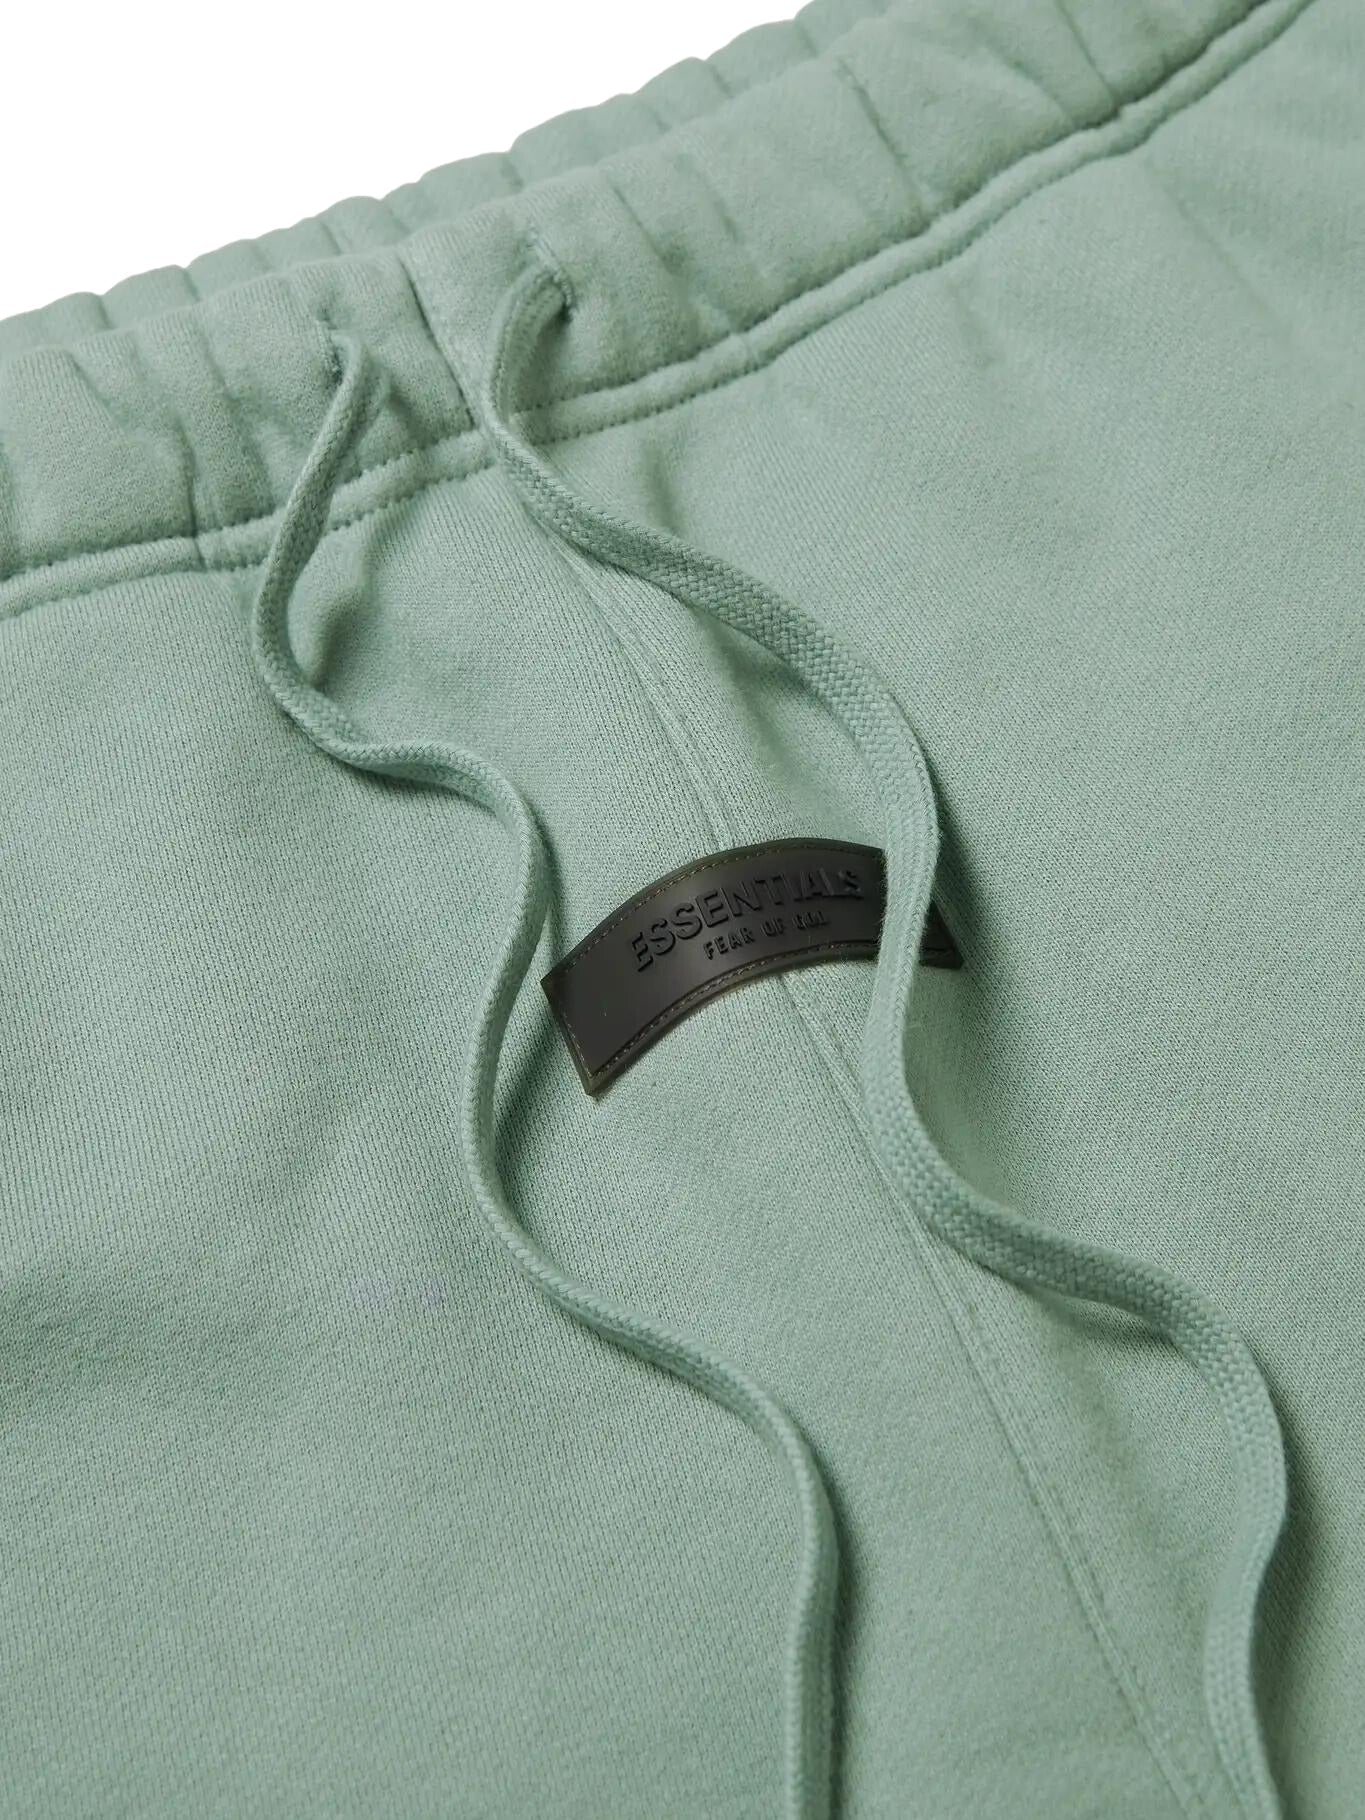 FEAR OF GOD ESSENTIALS SYCAMORE SHORTS (SS23) - Hype Locker UK